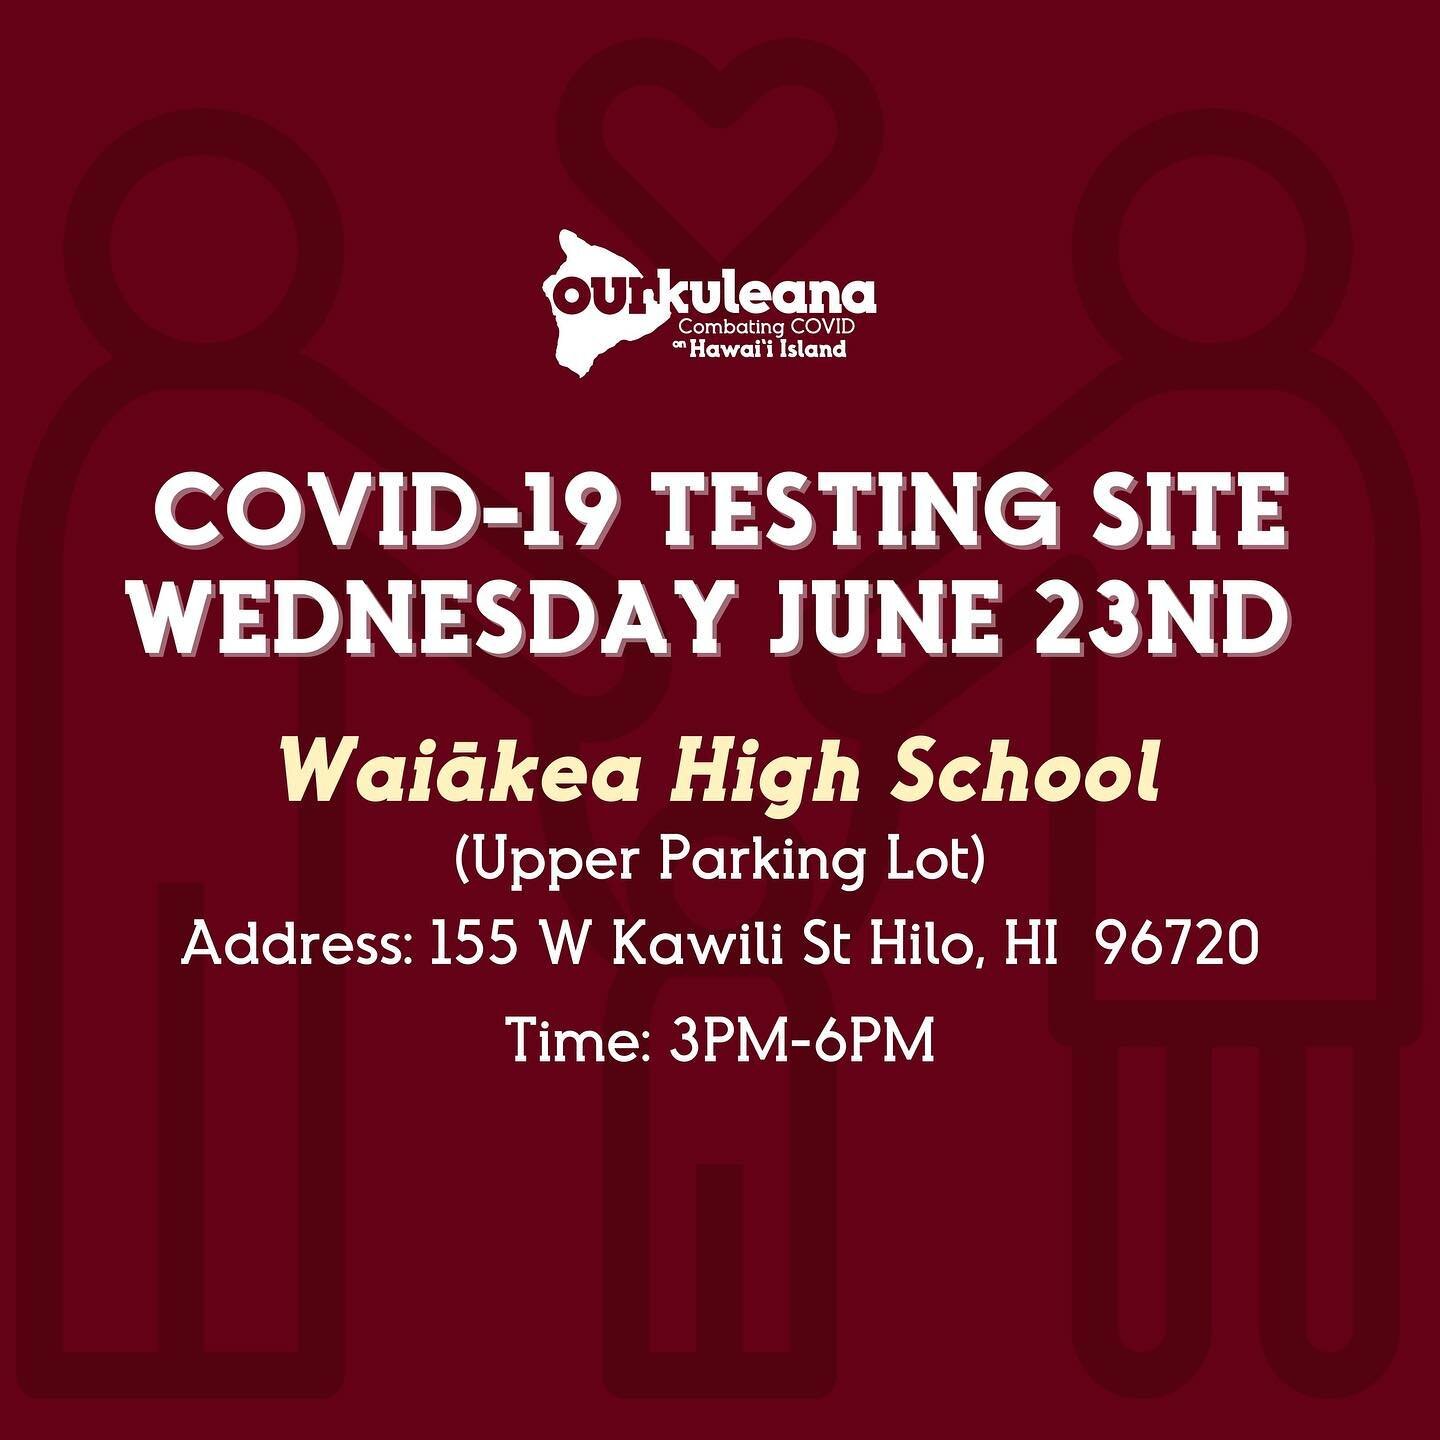 Community testing will be available tomorrow at Waiākea High School. If you have COVID symptoms or had close contact with someone with COVID please get tested. It&rsquo;s #ourkuleana to keep the community safe by stopping the spread.